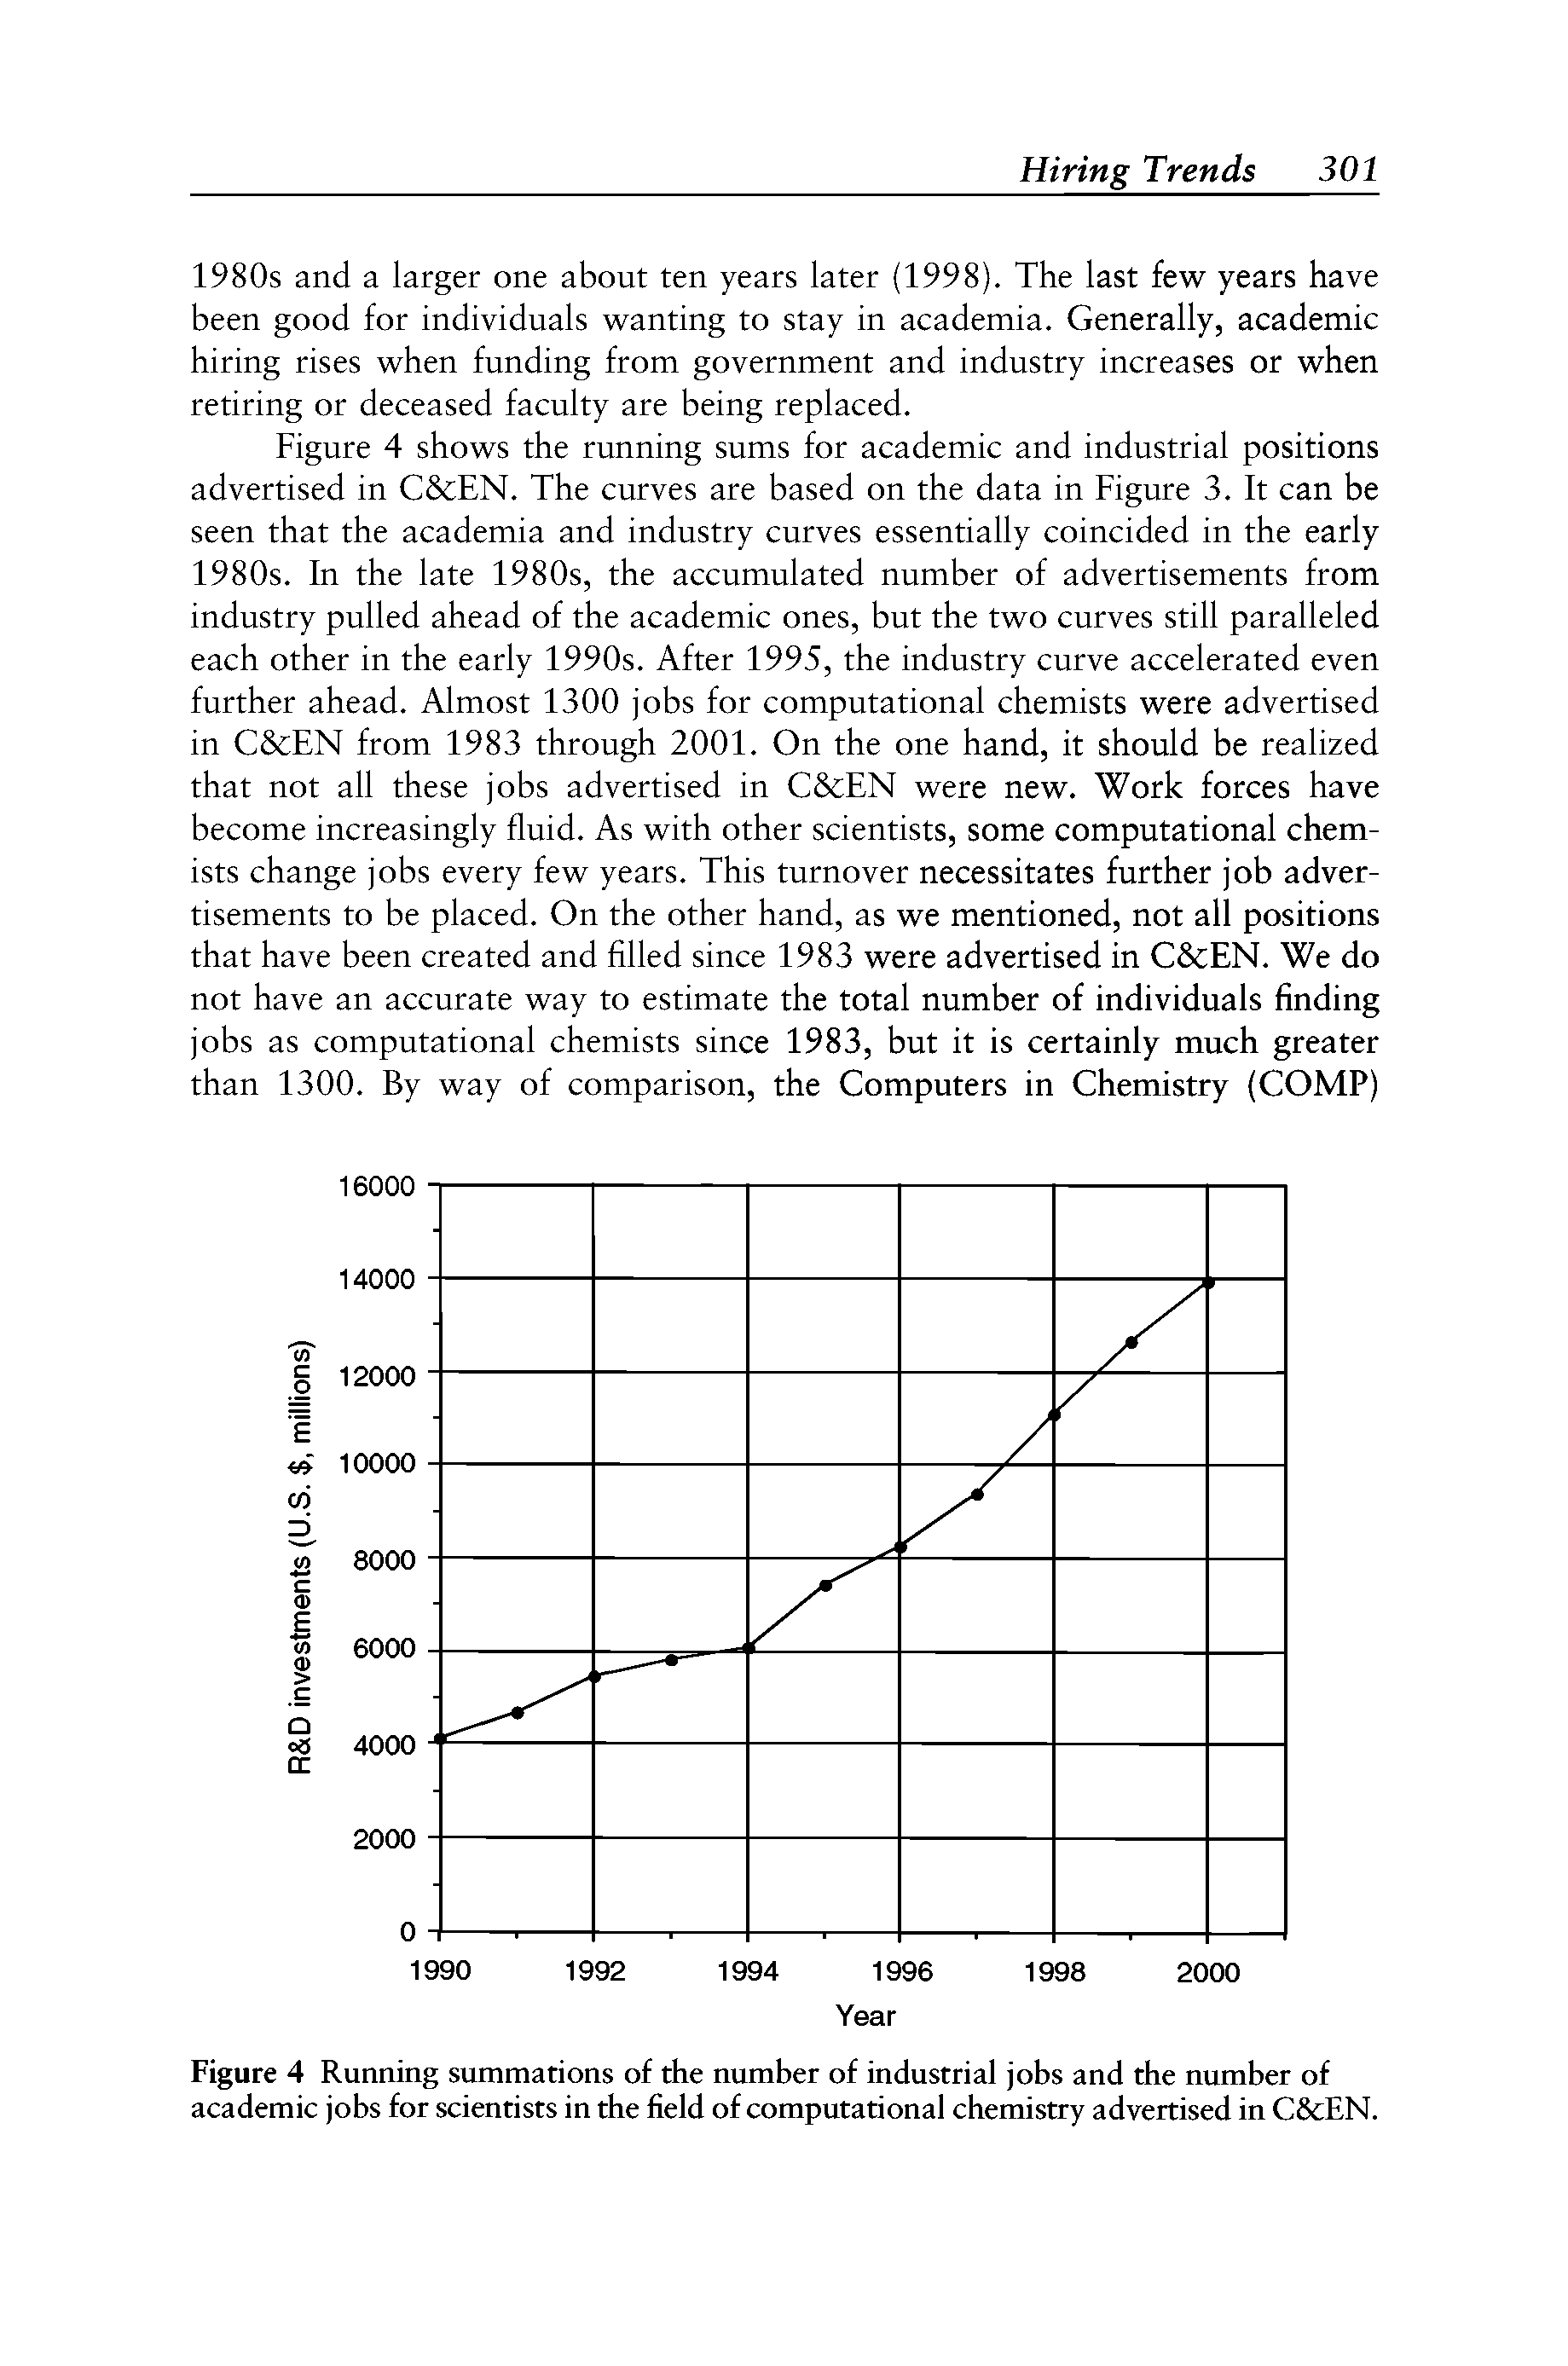 Figure 4 Running summations of the number of industrial jobs and the number of academic jobs for scientists in the field of computational chemistry advertised in C EN.